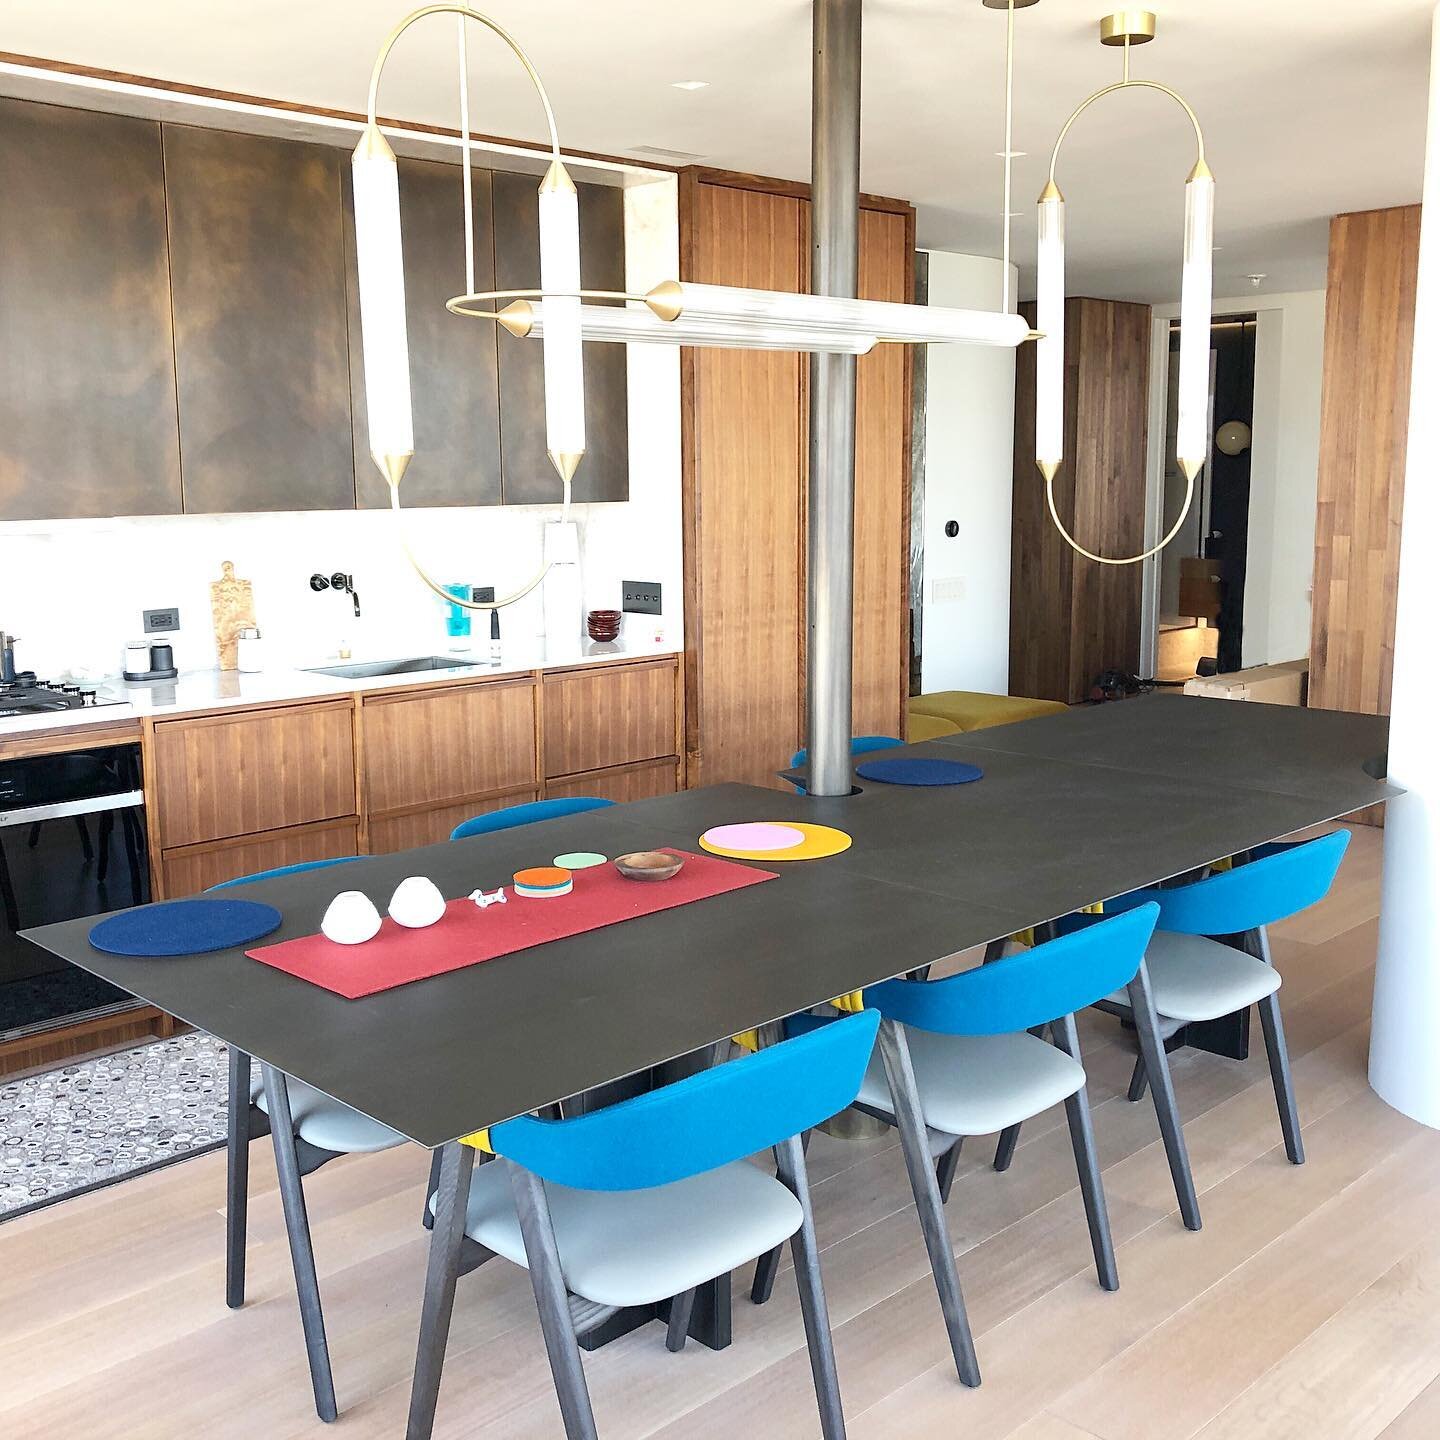 This 4ft by 12ft dining table was no easy feet. It captures both the gas pipe cover we made and the column of the building. Measurements had to be spot on. Its built from three interacting components and structured like an aircraft wing containing in